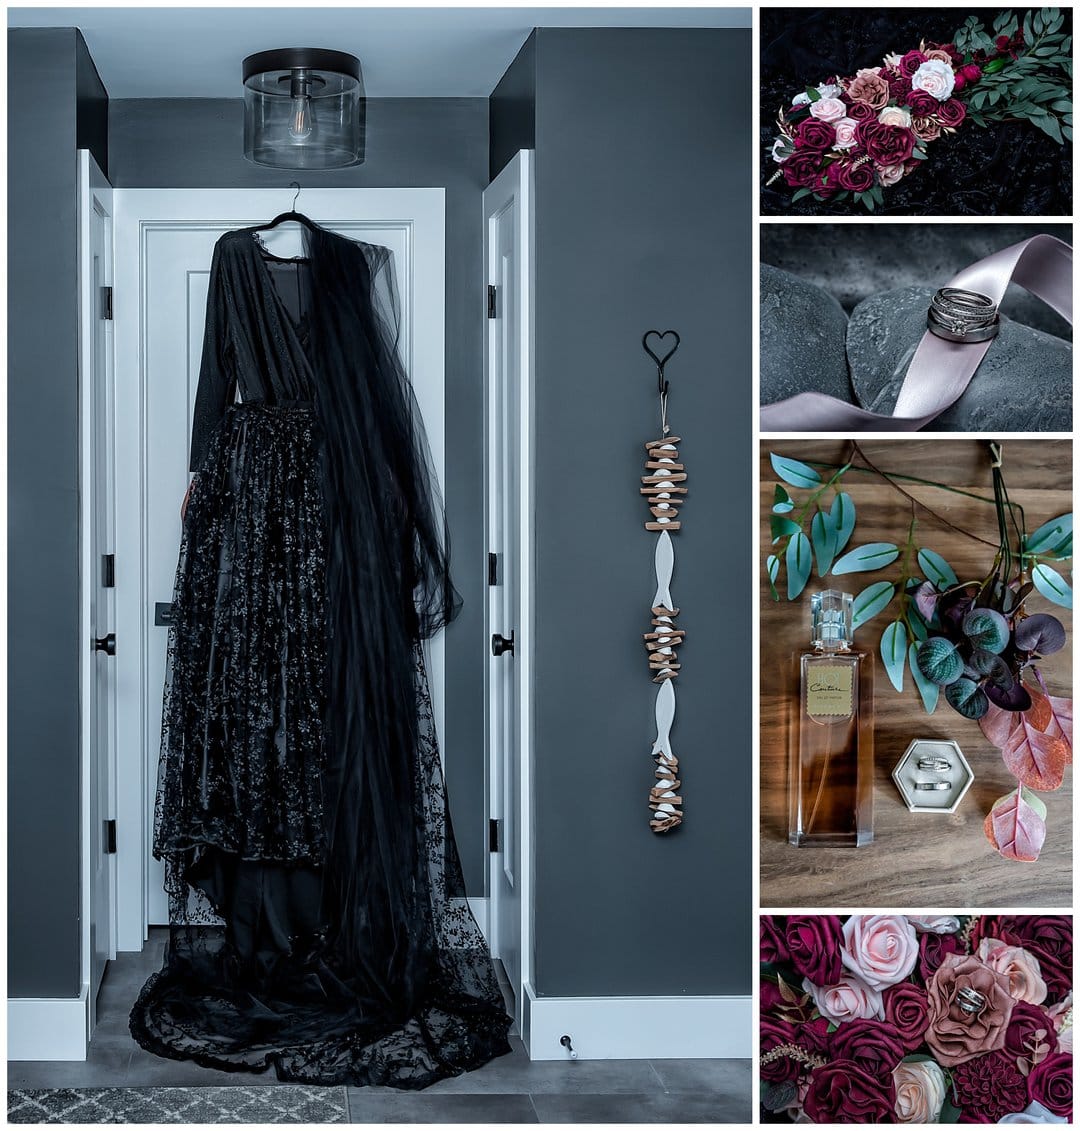 The bride's black wedding dress, perfume, wedding rings and bouquet.